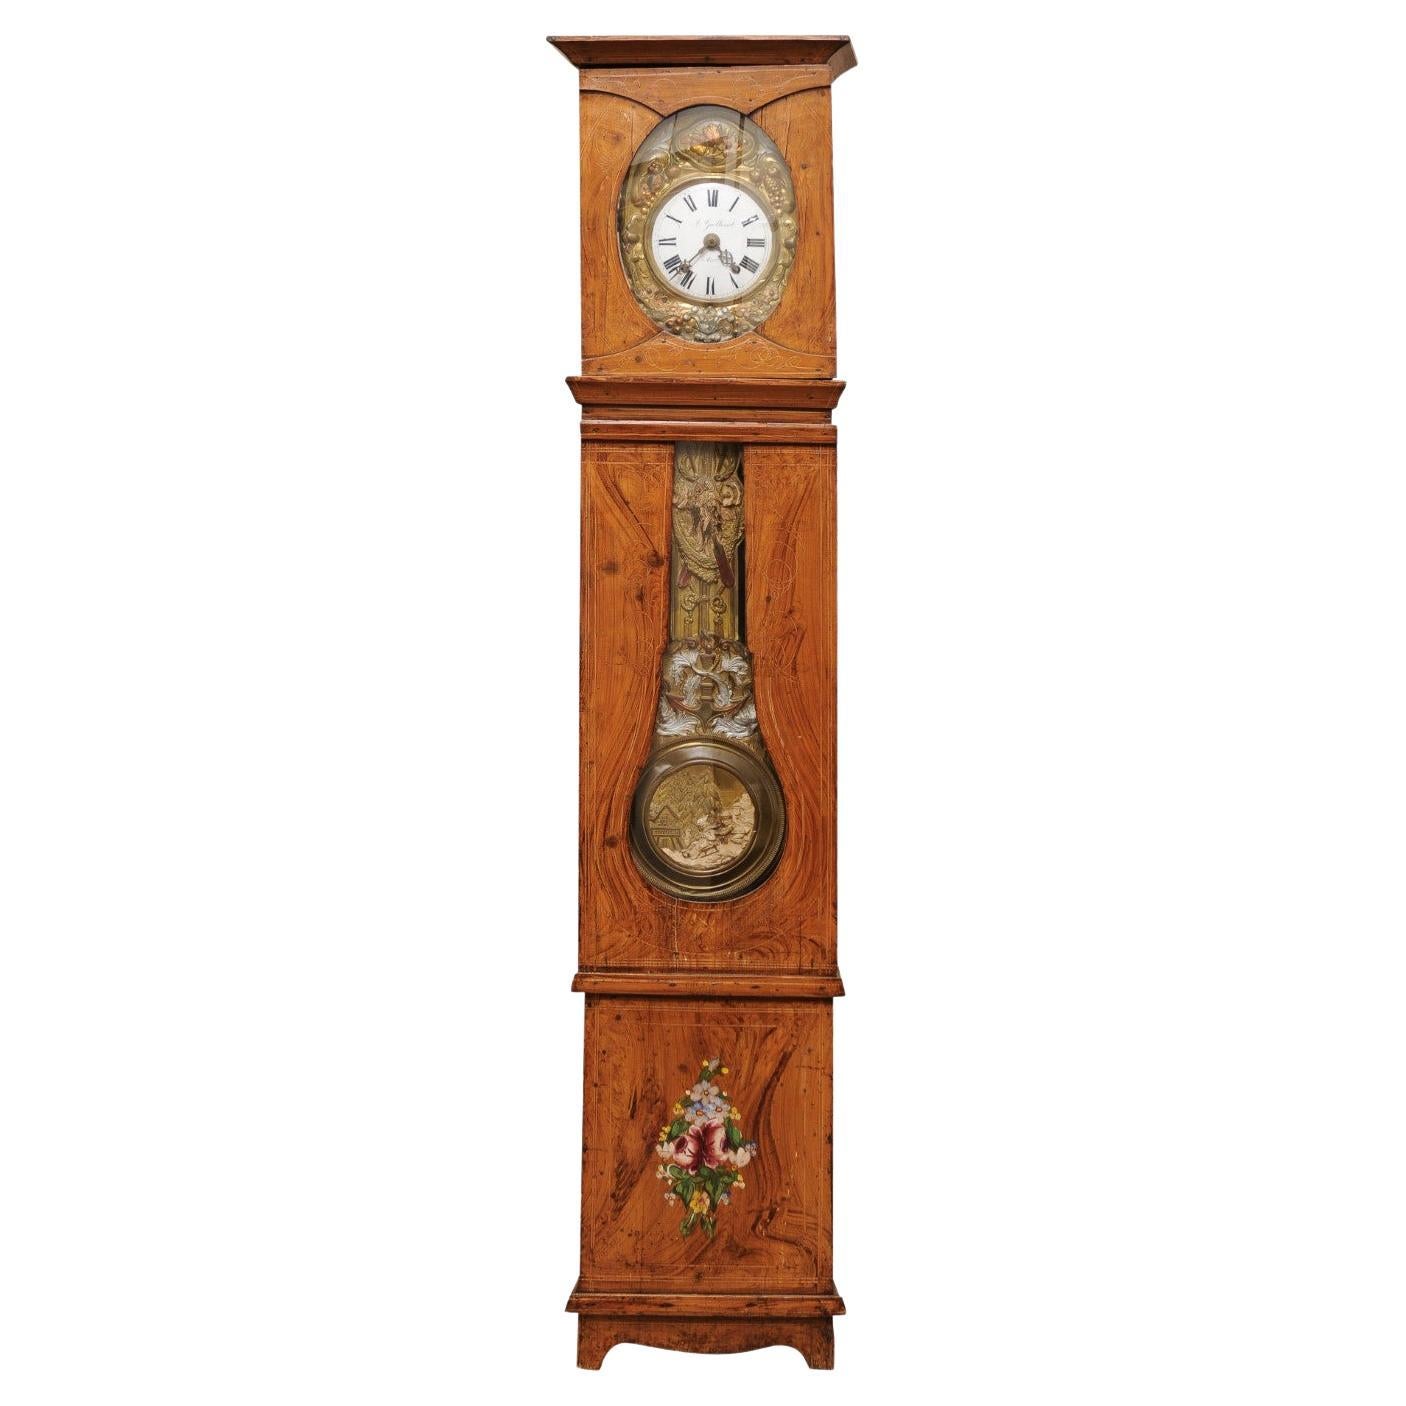 19th Century French Faux Bois Painted Tallcase Clock with Pressed Gilt Metal